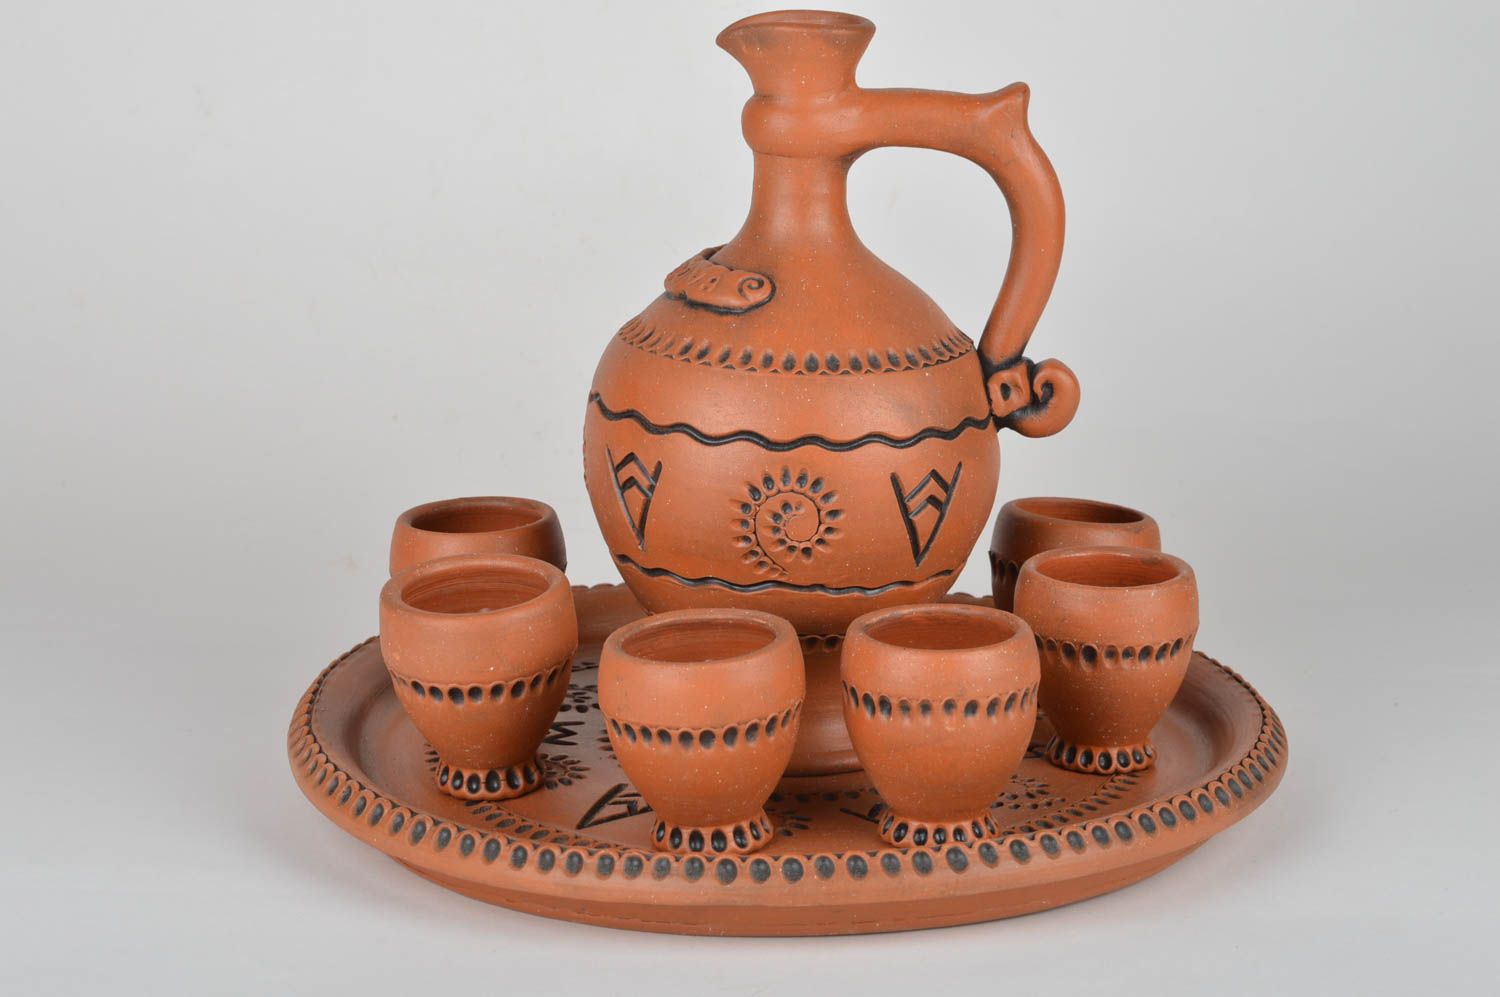 Wine carafe set of wine 25 oz pitcher and 6 wine goblets in terracotta style with ceramic tray 5,2 lb photo 5